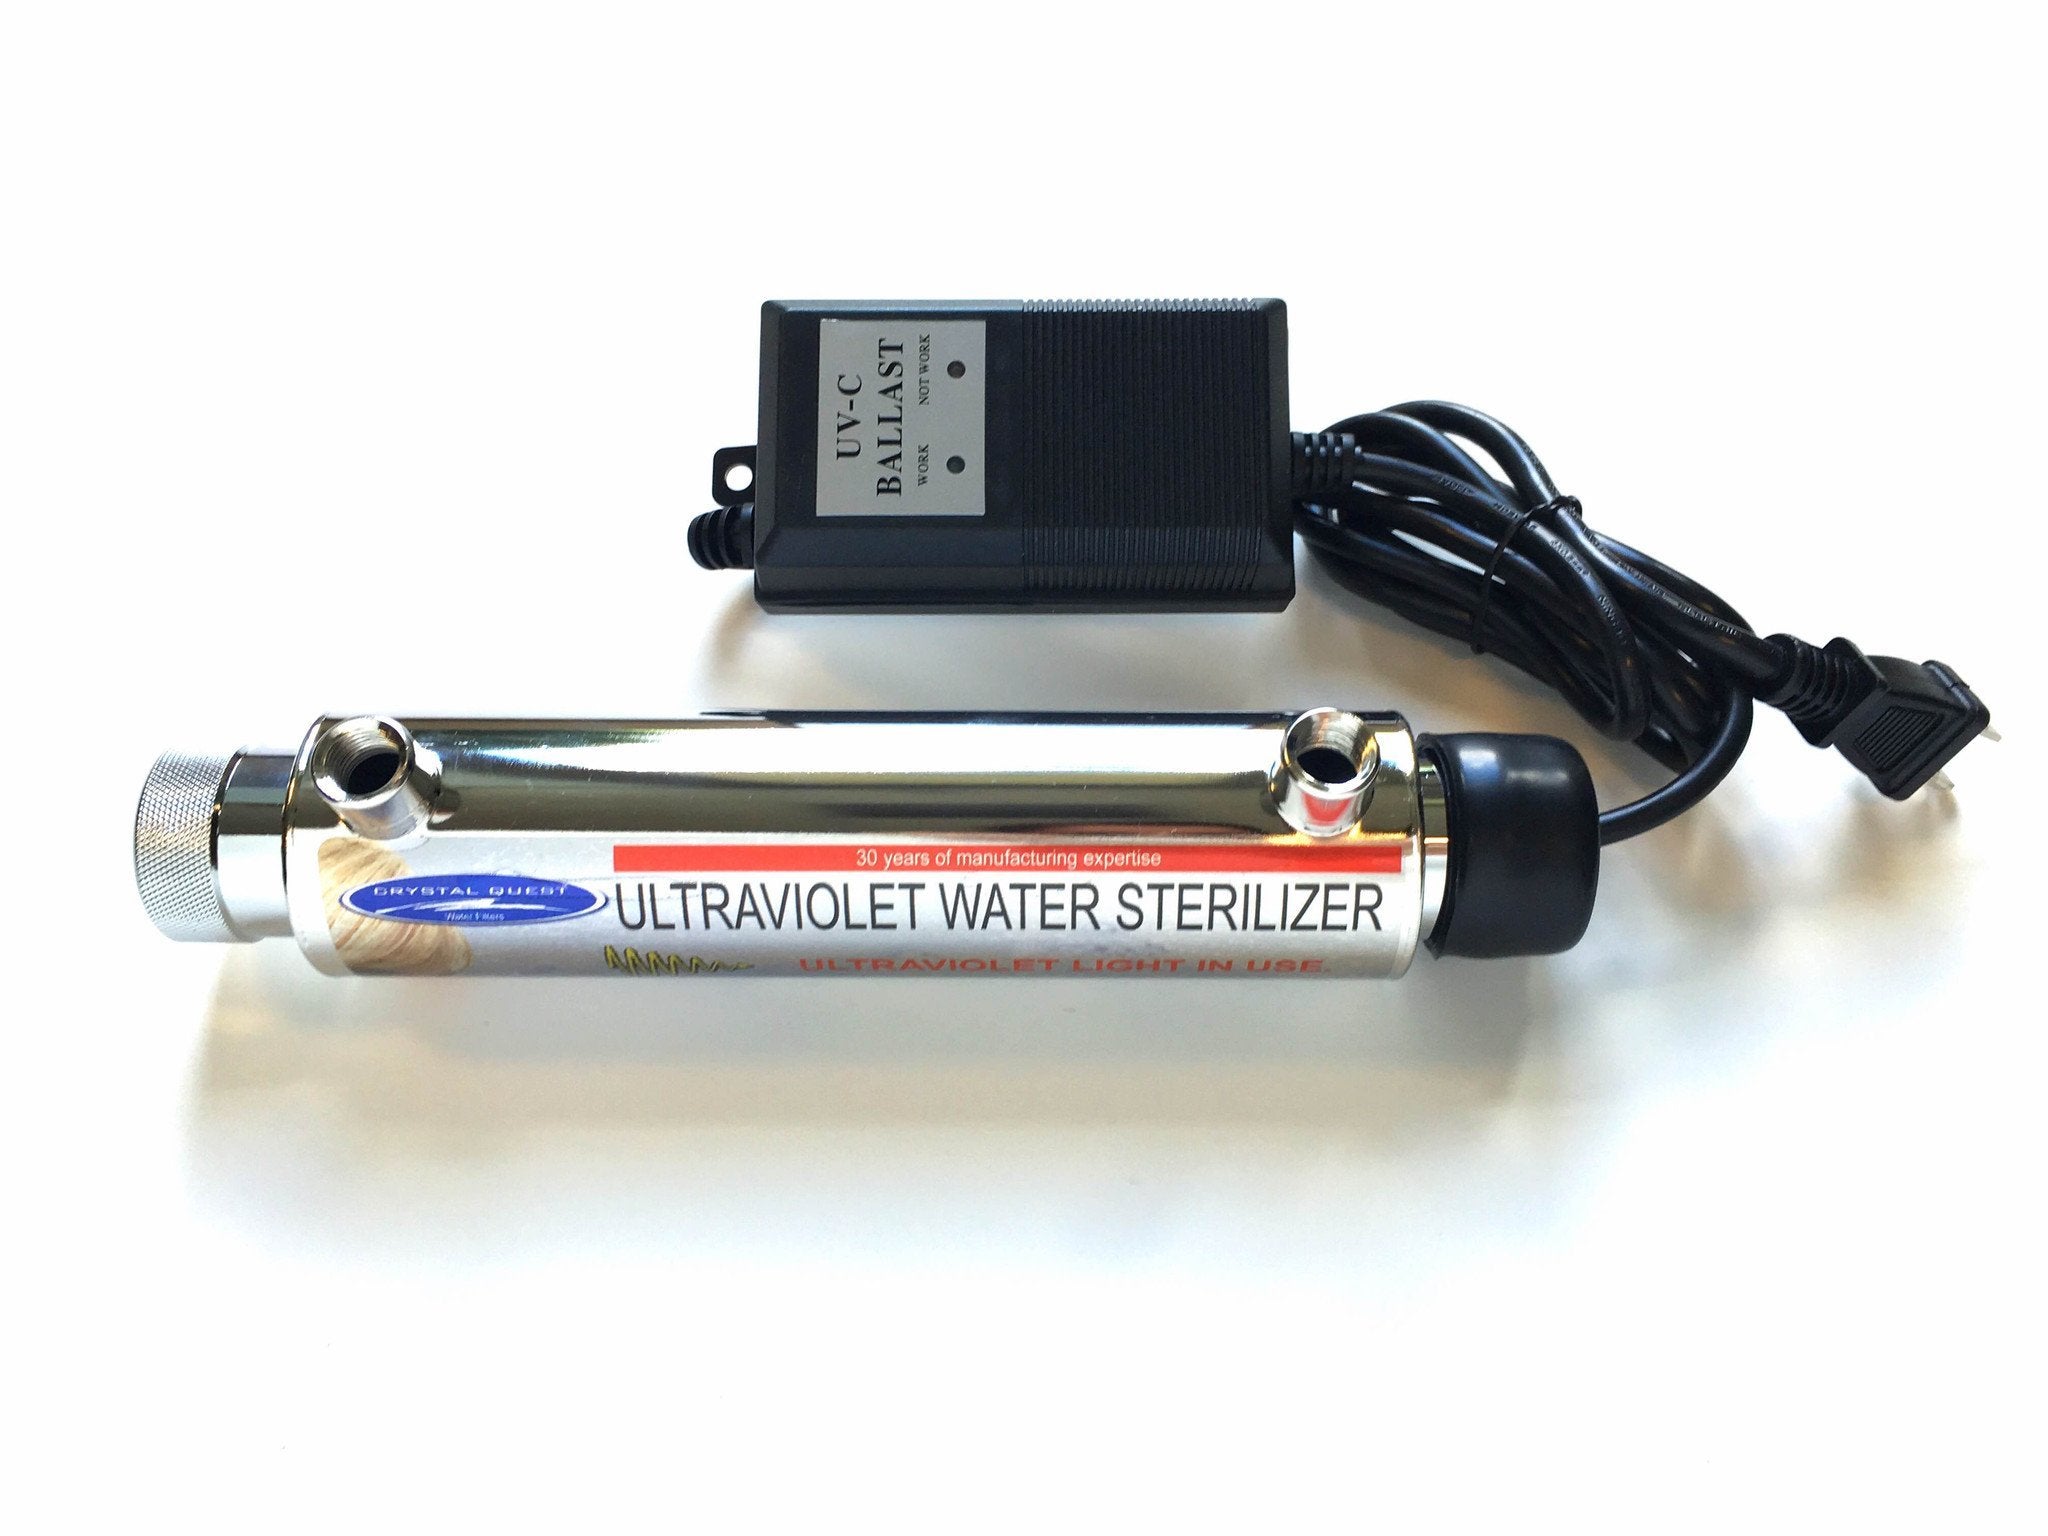 Crystal Quest, 1 GPM Ultraviolet Water Sterilizer System